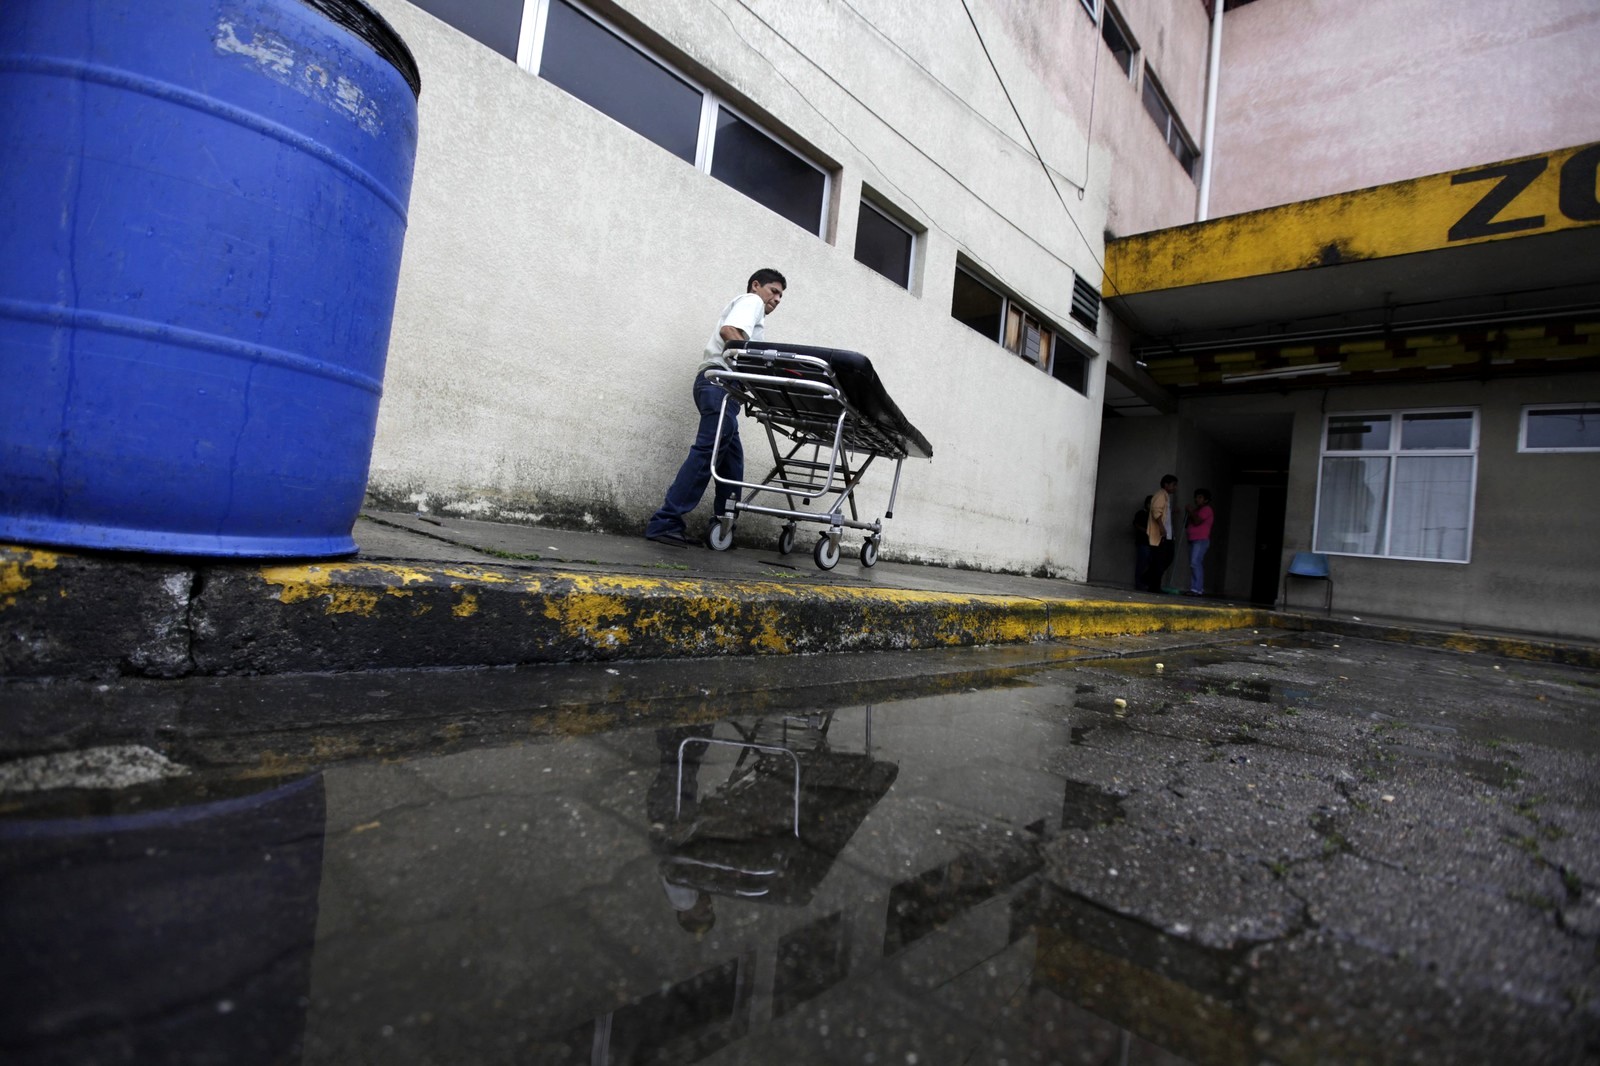 A man pushes a stretcher after taking a body to the morgue of a local hospital in San Pedro Sula March 27, 2013. San Pedro Sula, the country's second largest city after Tegucigalpa, has a homicide rate of 169 per 100,000 people and was named the world's most violent city for a second year in a row. Lax laws allow civilians to own up to five personal guns. Arms trafficking has flooded the country with nearly 70% illegal firearms. 83.4% of homicides are by firearms, compared to 60% in the United States. Picture taken March 27, 2013. REUTERS/Jorge Cabrera (HONDURAS - Tags: CRIME LAW CIVIL UNREST HEALTH) ATTENTION EDITORS: PICTURE 14 OF 39 FOR PACKAGE 'GUN CULTURE - HONDURAS' SEARCH 'HONDURAS GUN' FOR ALL IMAGES